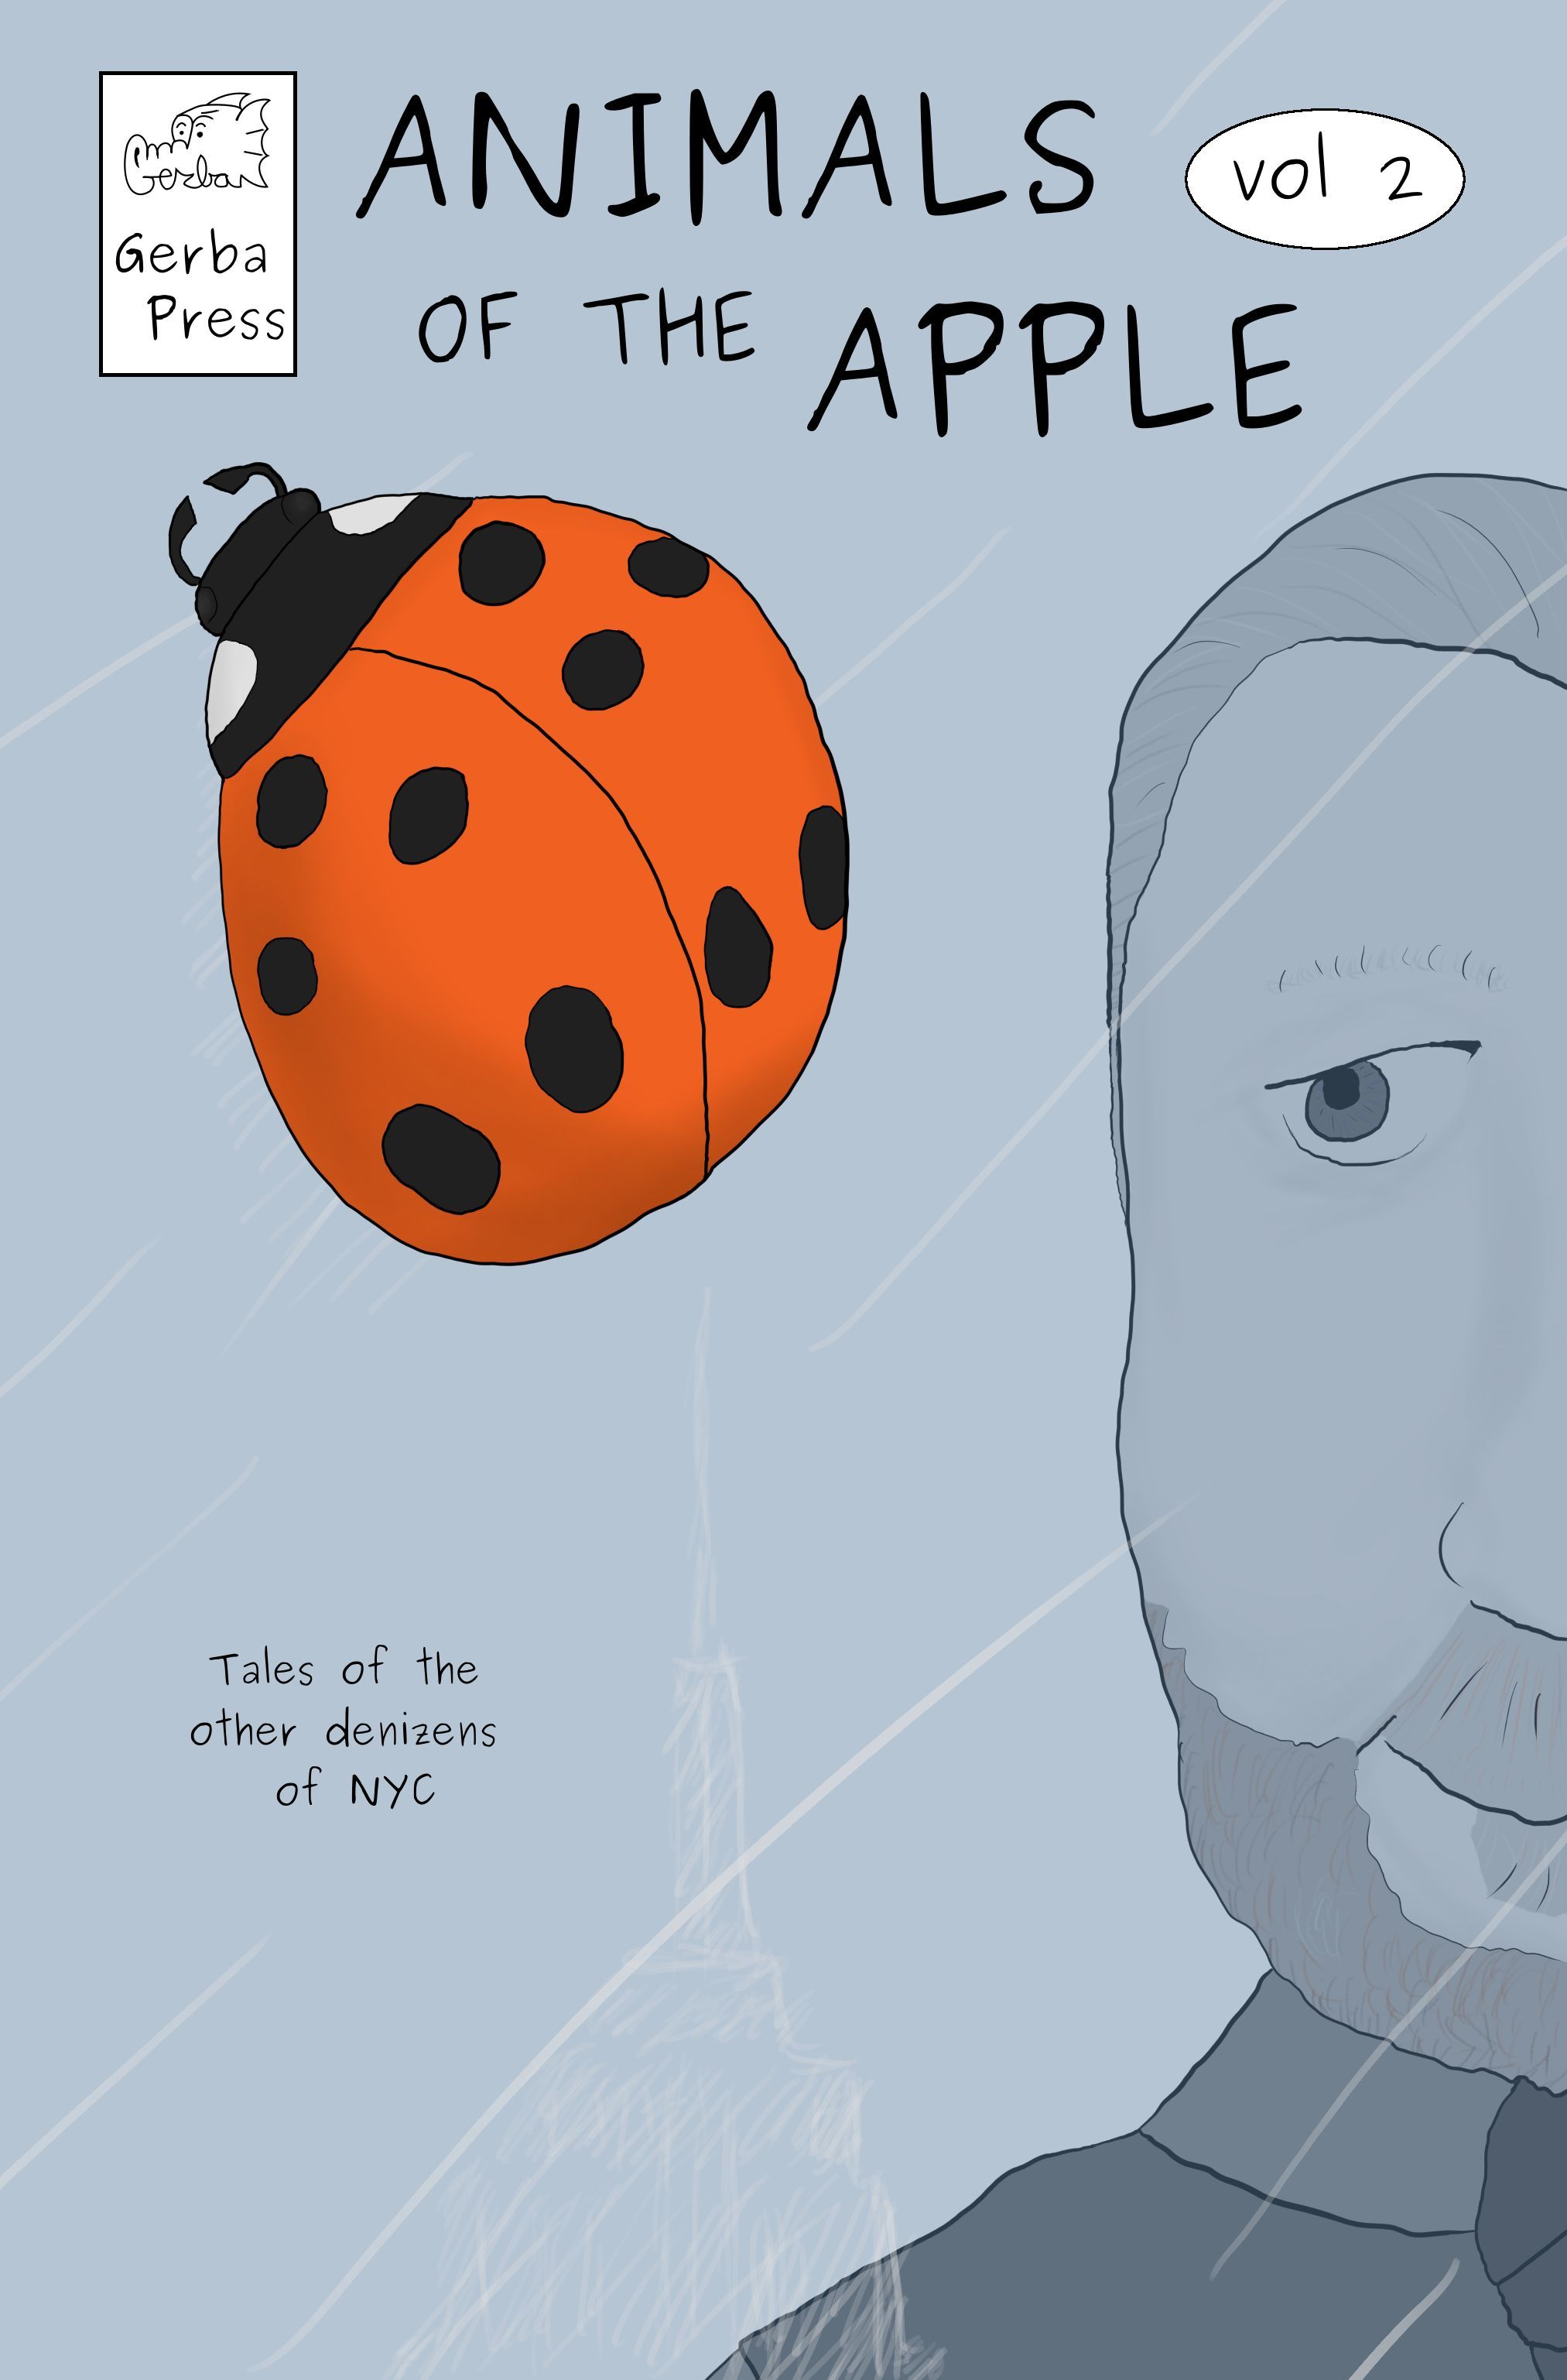 The cover of a comic featuring  Phillip Gerba looking at a ladybug on the other side of a pane of glass with the Empire State Building being reflected in glass.